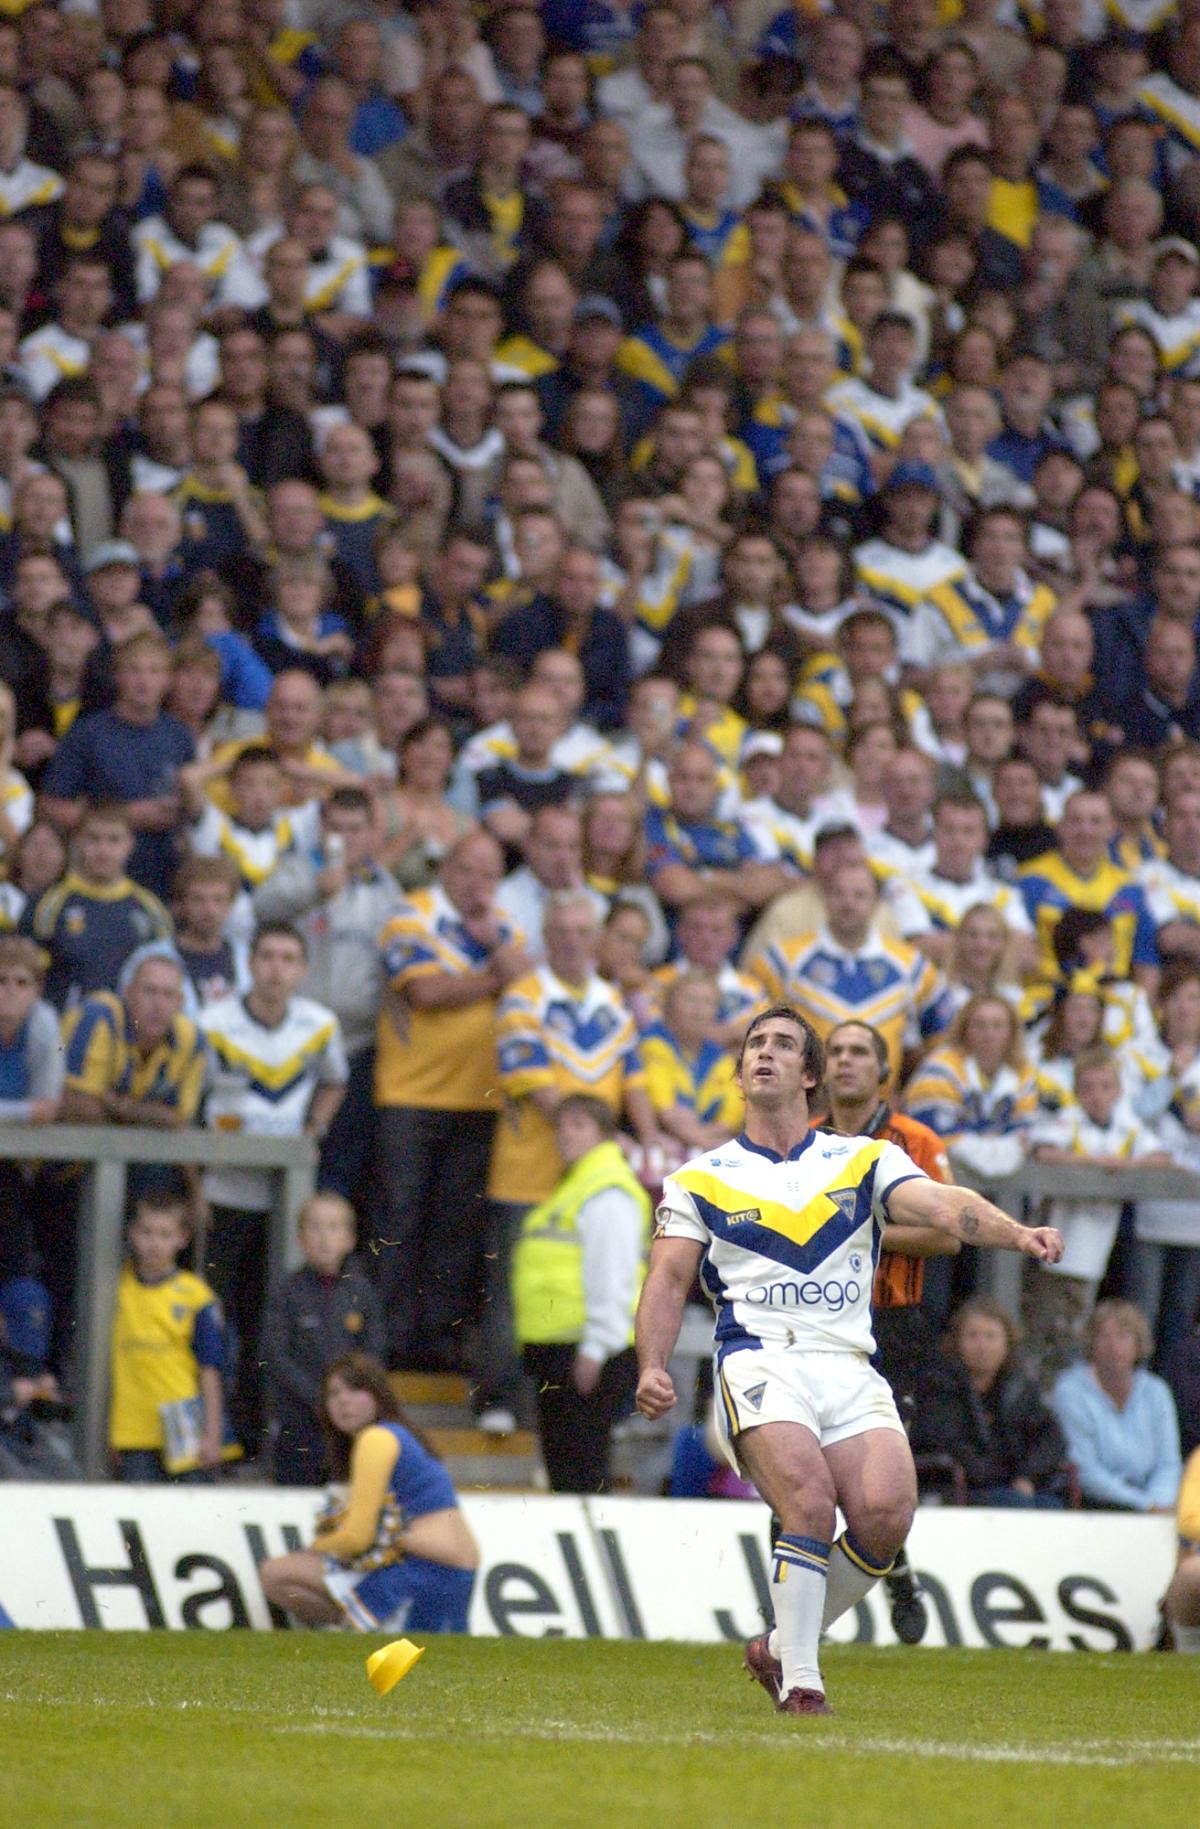 The great Andrew Johns, who made three appearances for Wolves in 2005. Pictures by Mike Boden